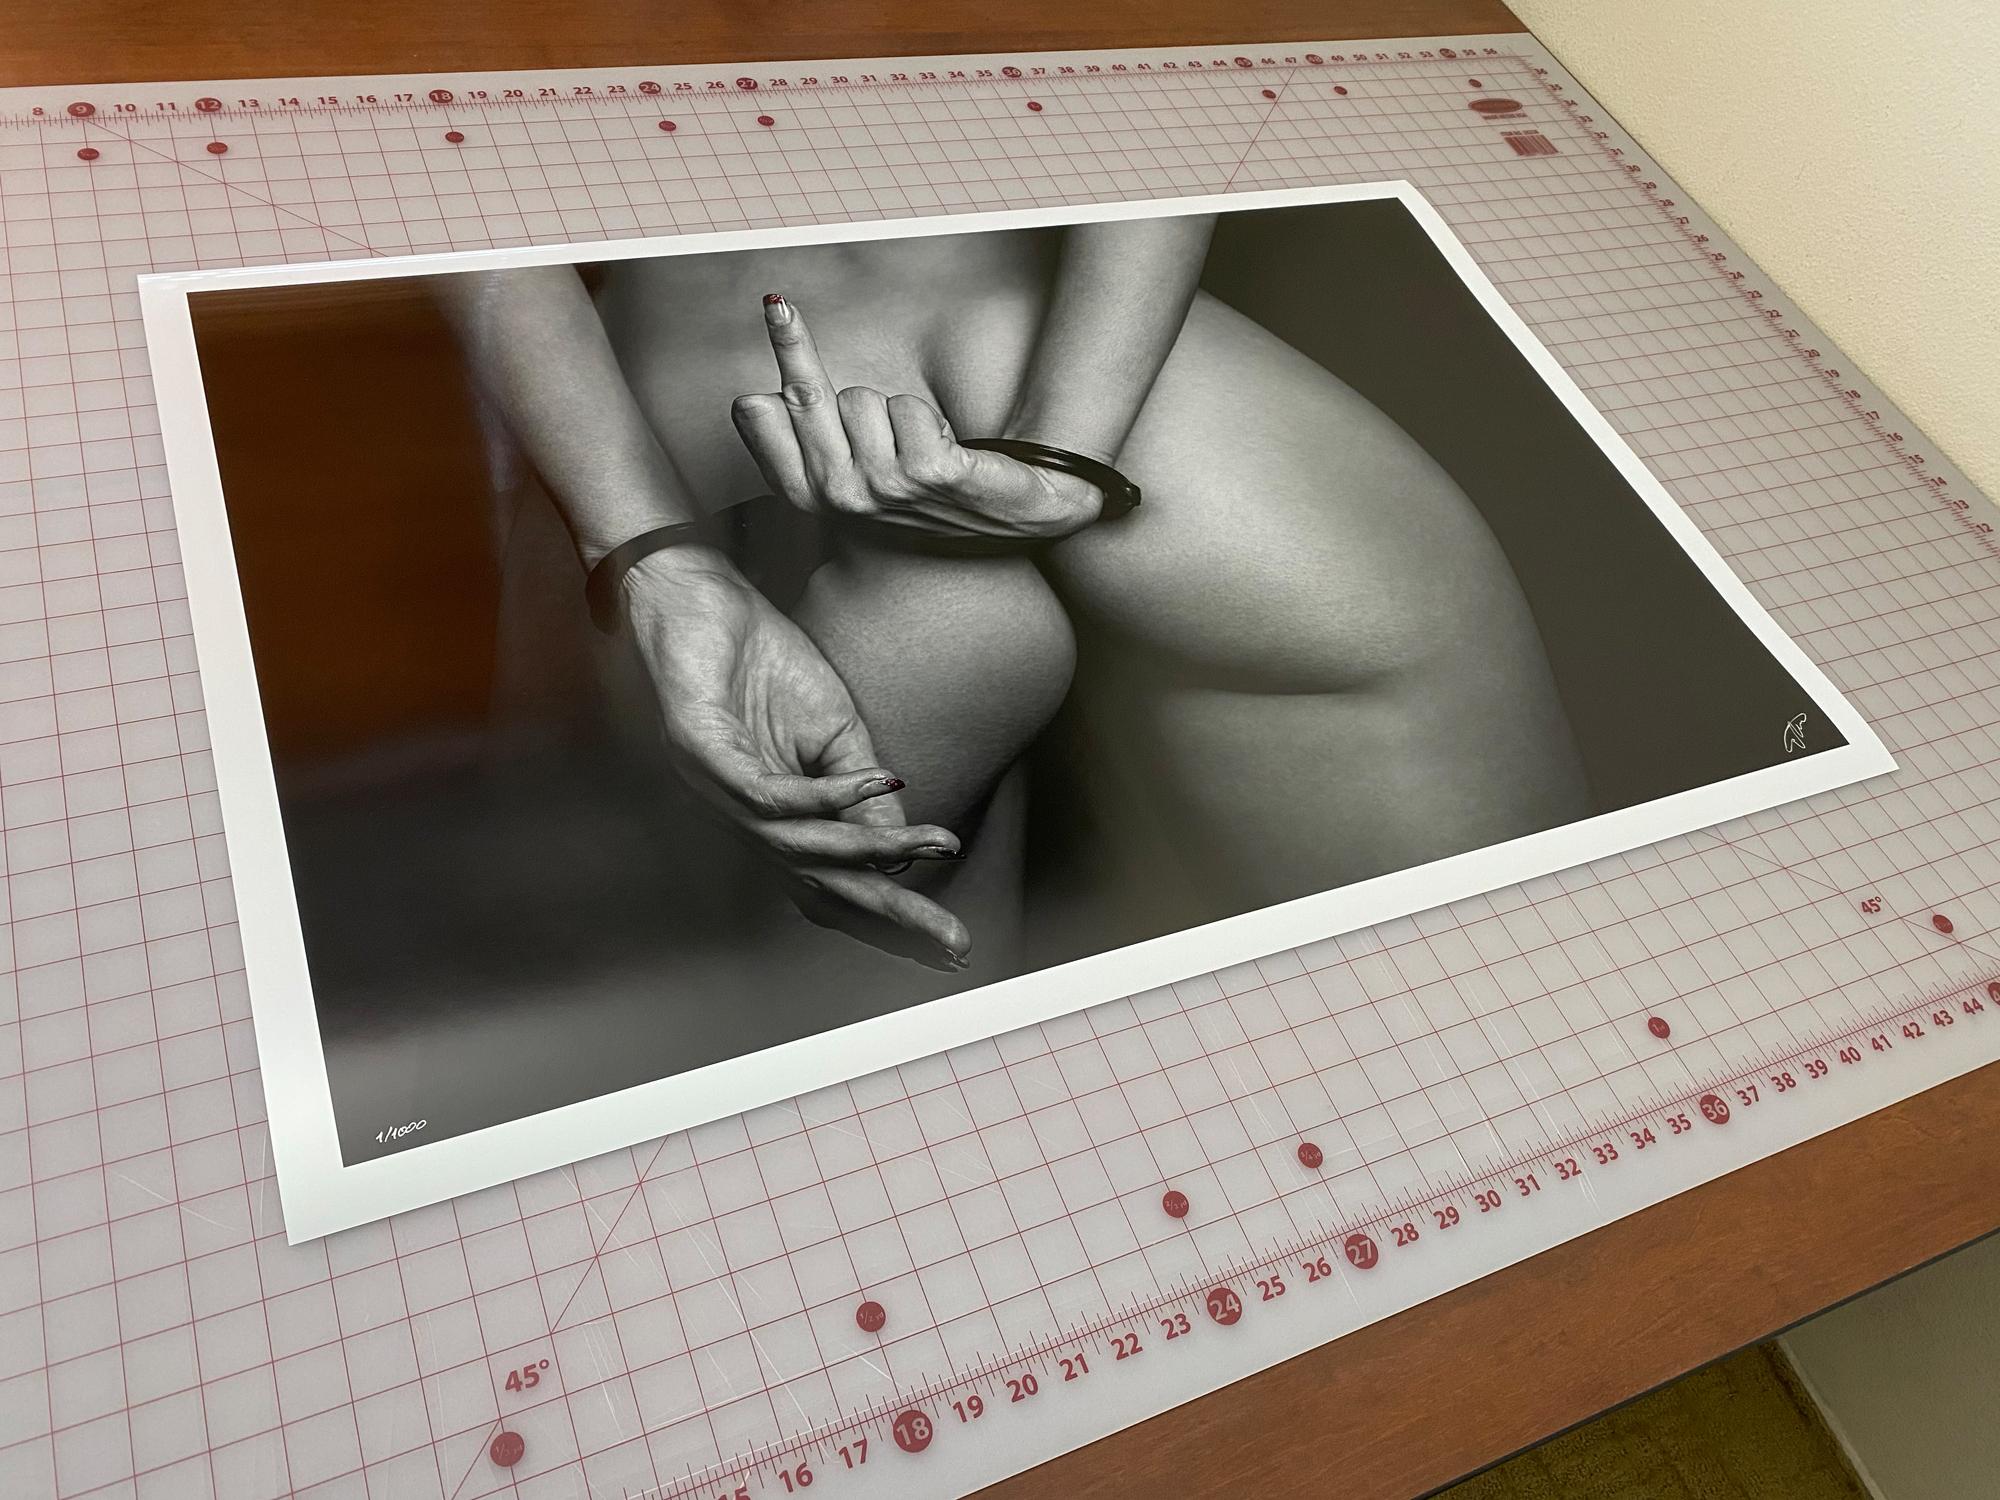 A black and white photograph of a perfect woman's buttocks and her handcuffed hands giving a finger.

Original gallery quality archival pigment print signed by the artist. 
Limited edition of 1000. Print #6.
Paper size: 23x36